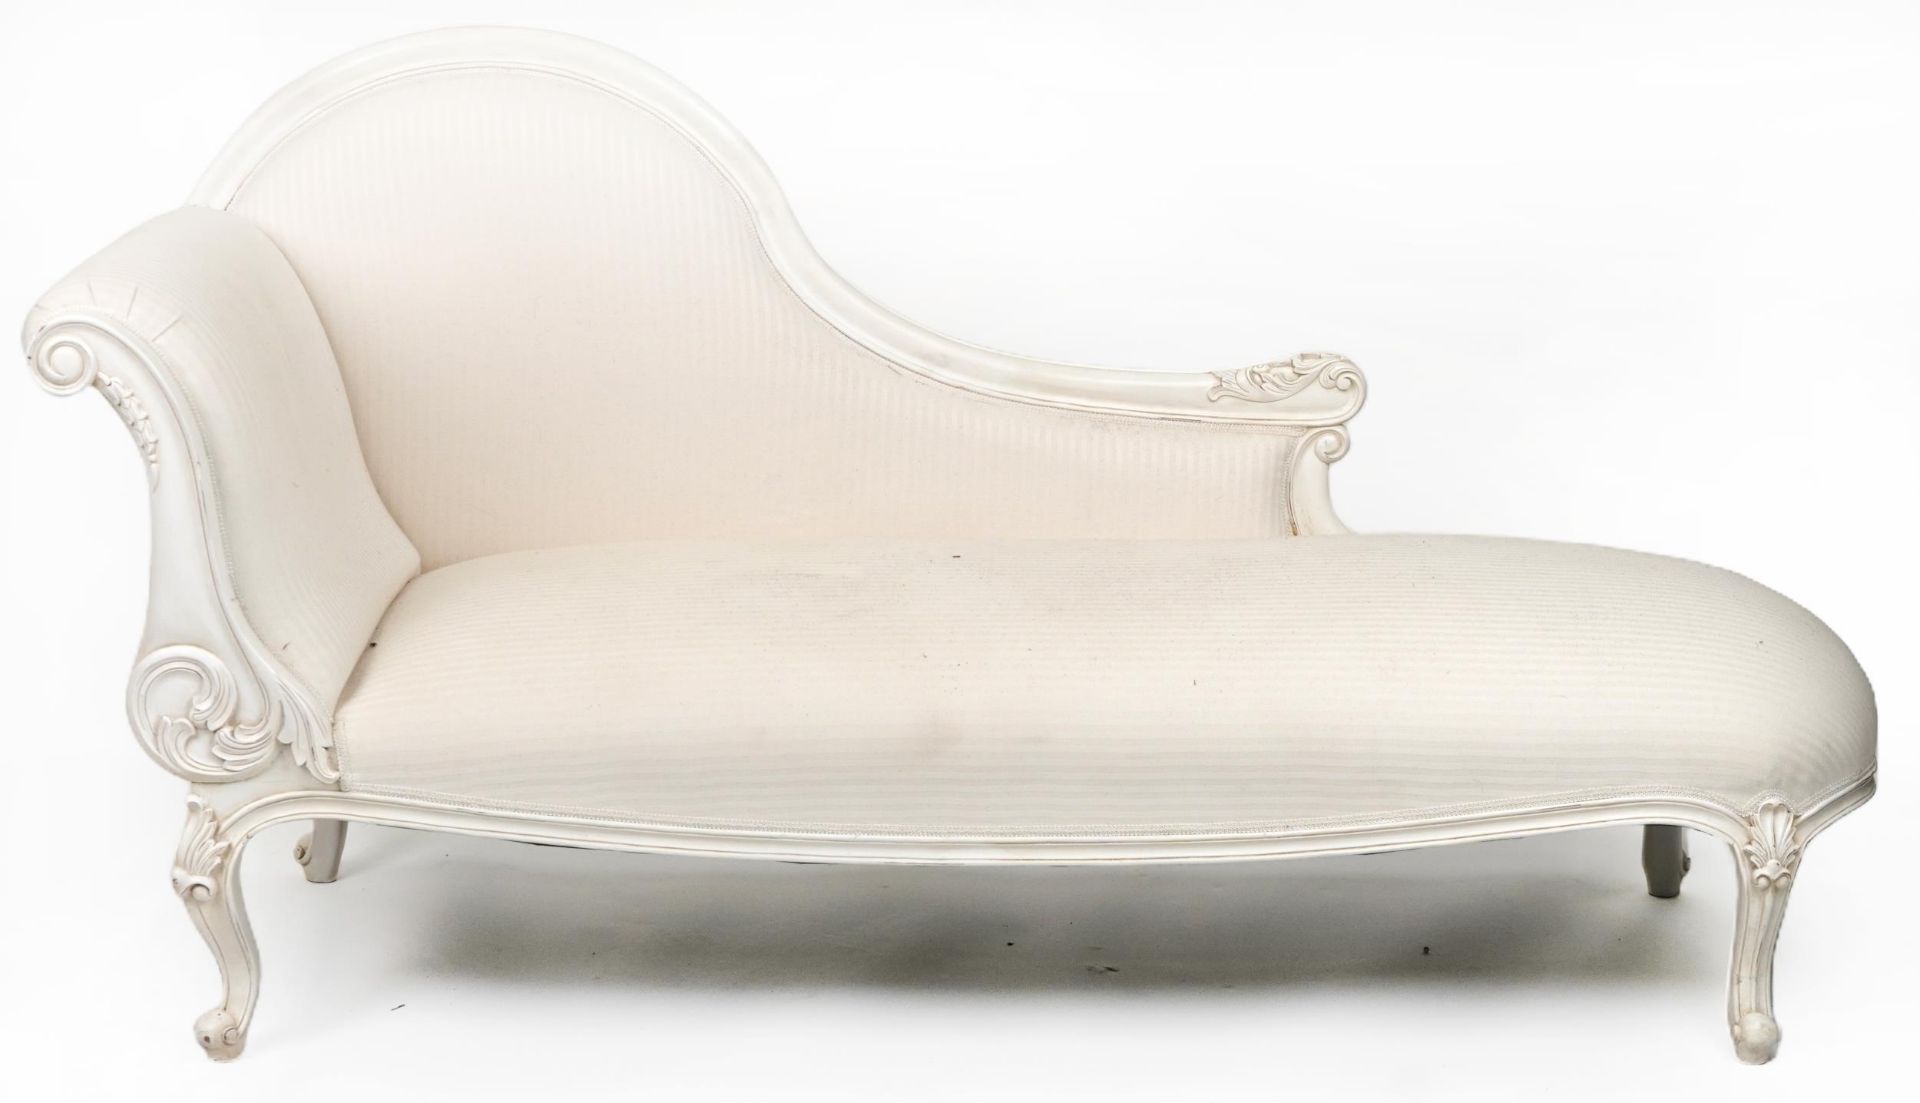 Contemporary French style chaise longue with striped cream upholstery on carved cabriole legs with - Image 2 of 4